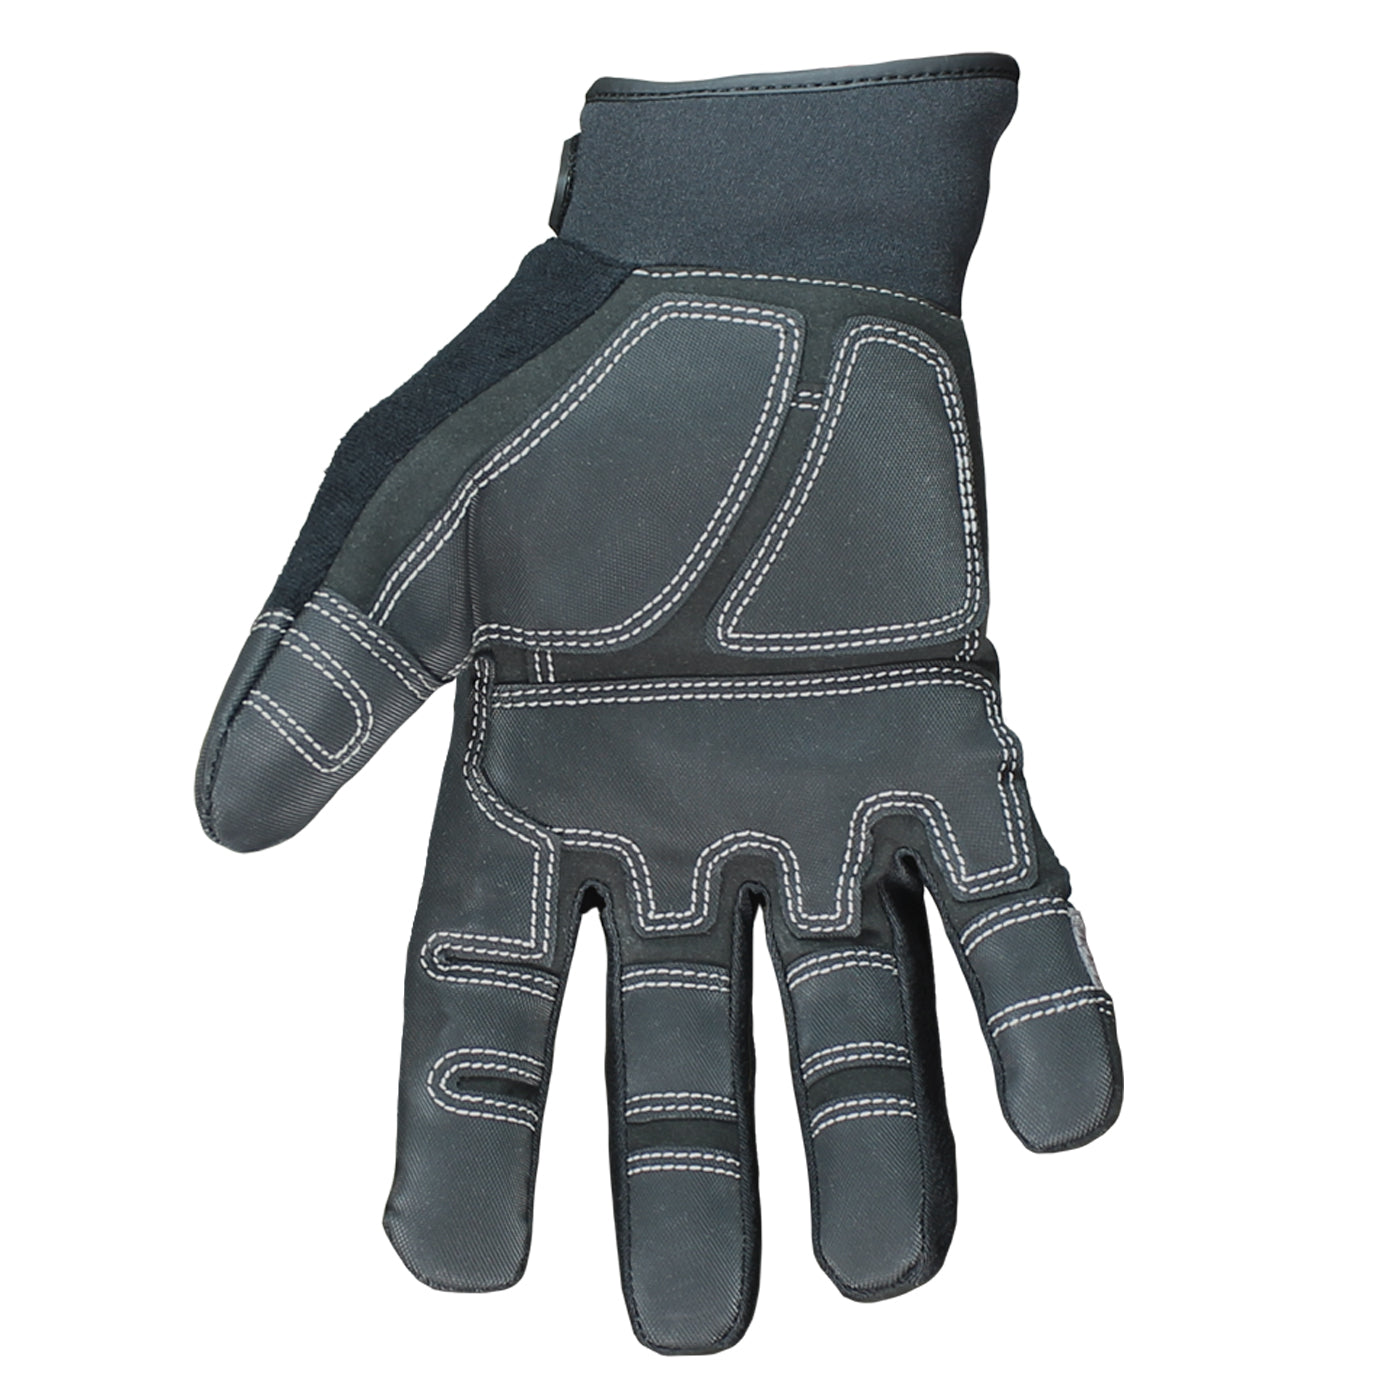 03-3050-78 Youngstown Pro XT Glove - Main image